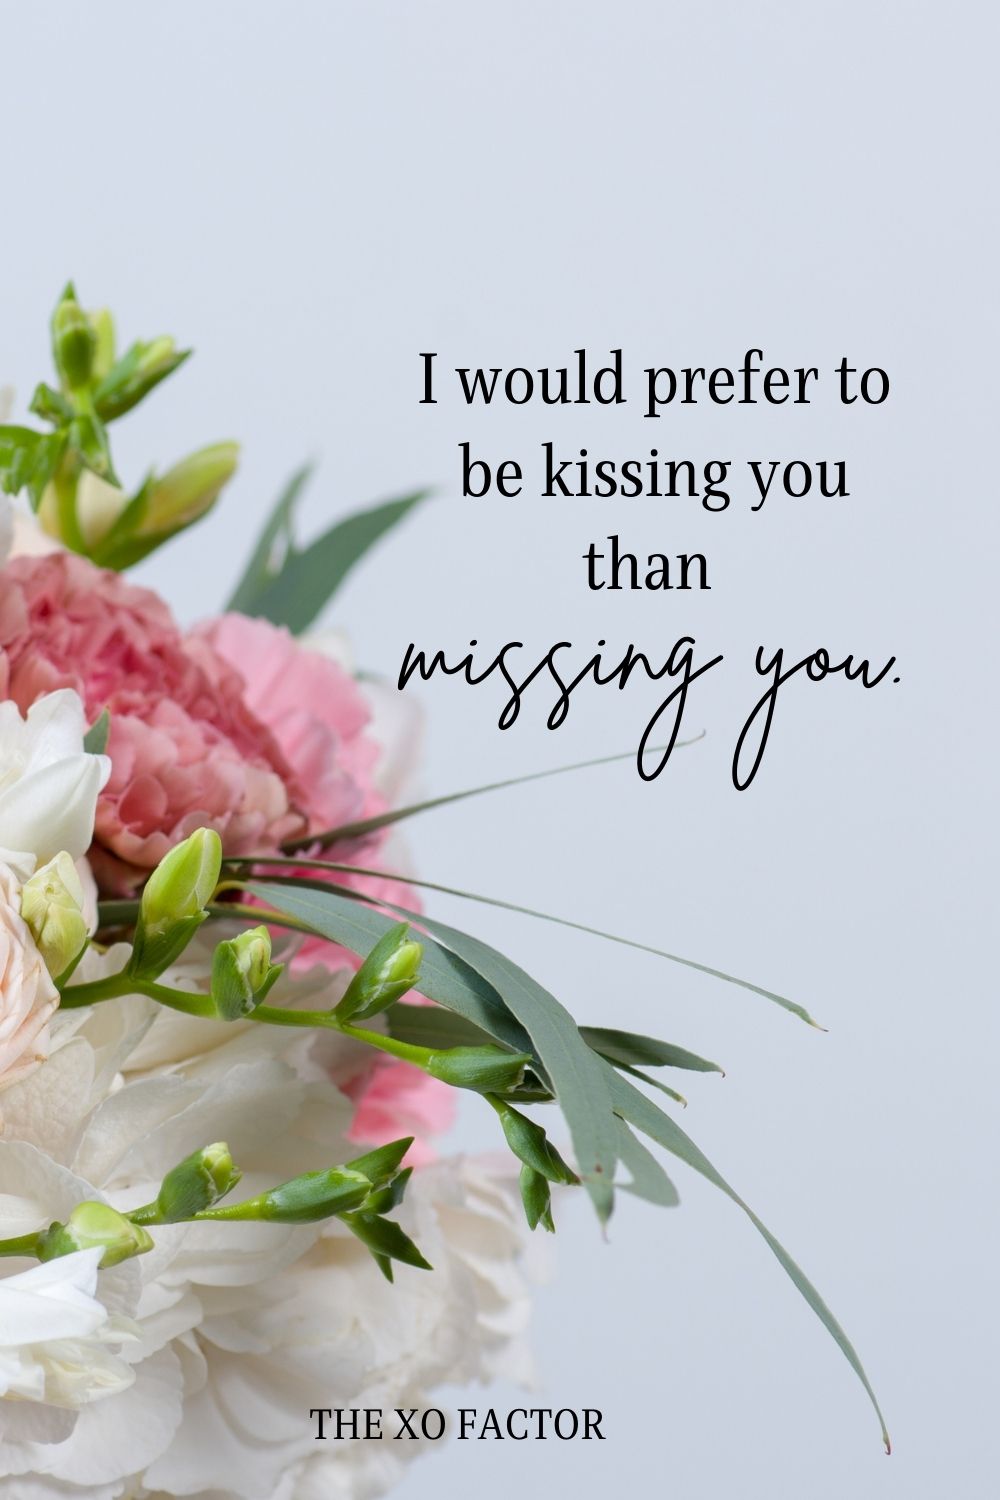 I would prefer to be kissing you than missing you.